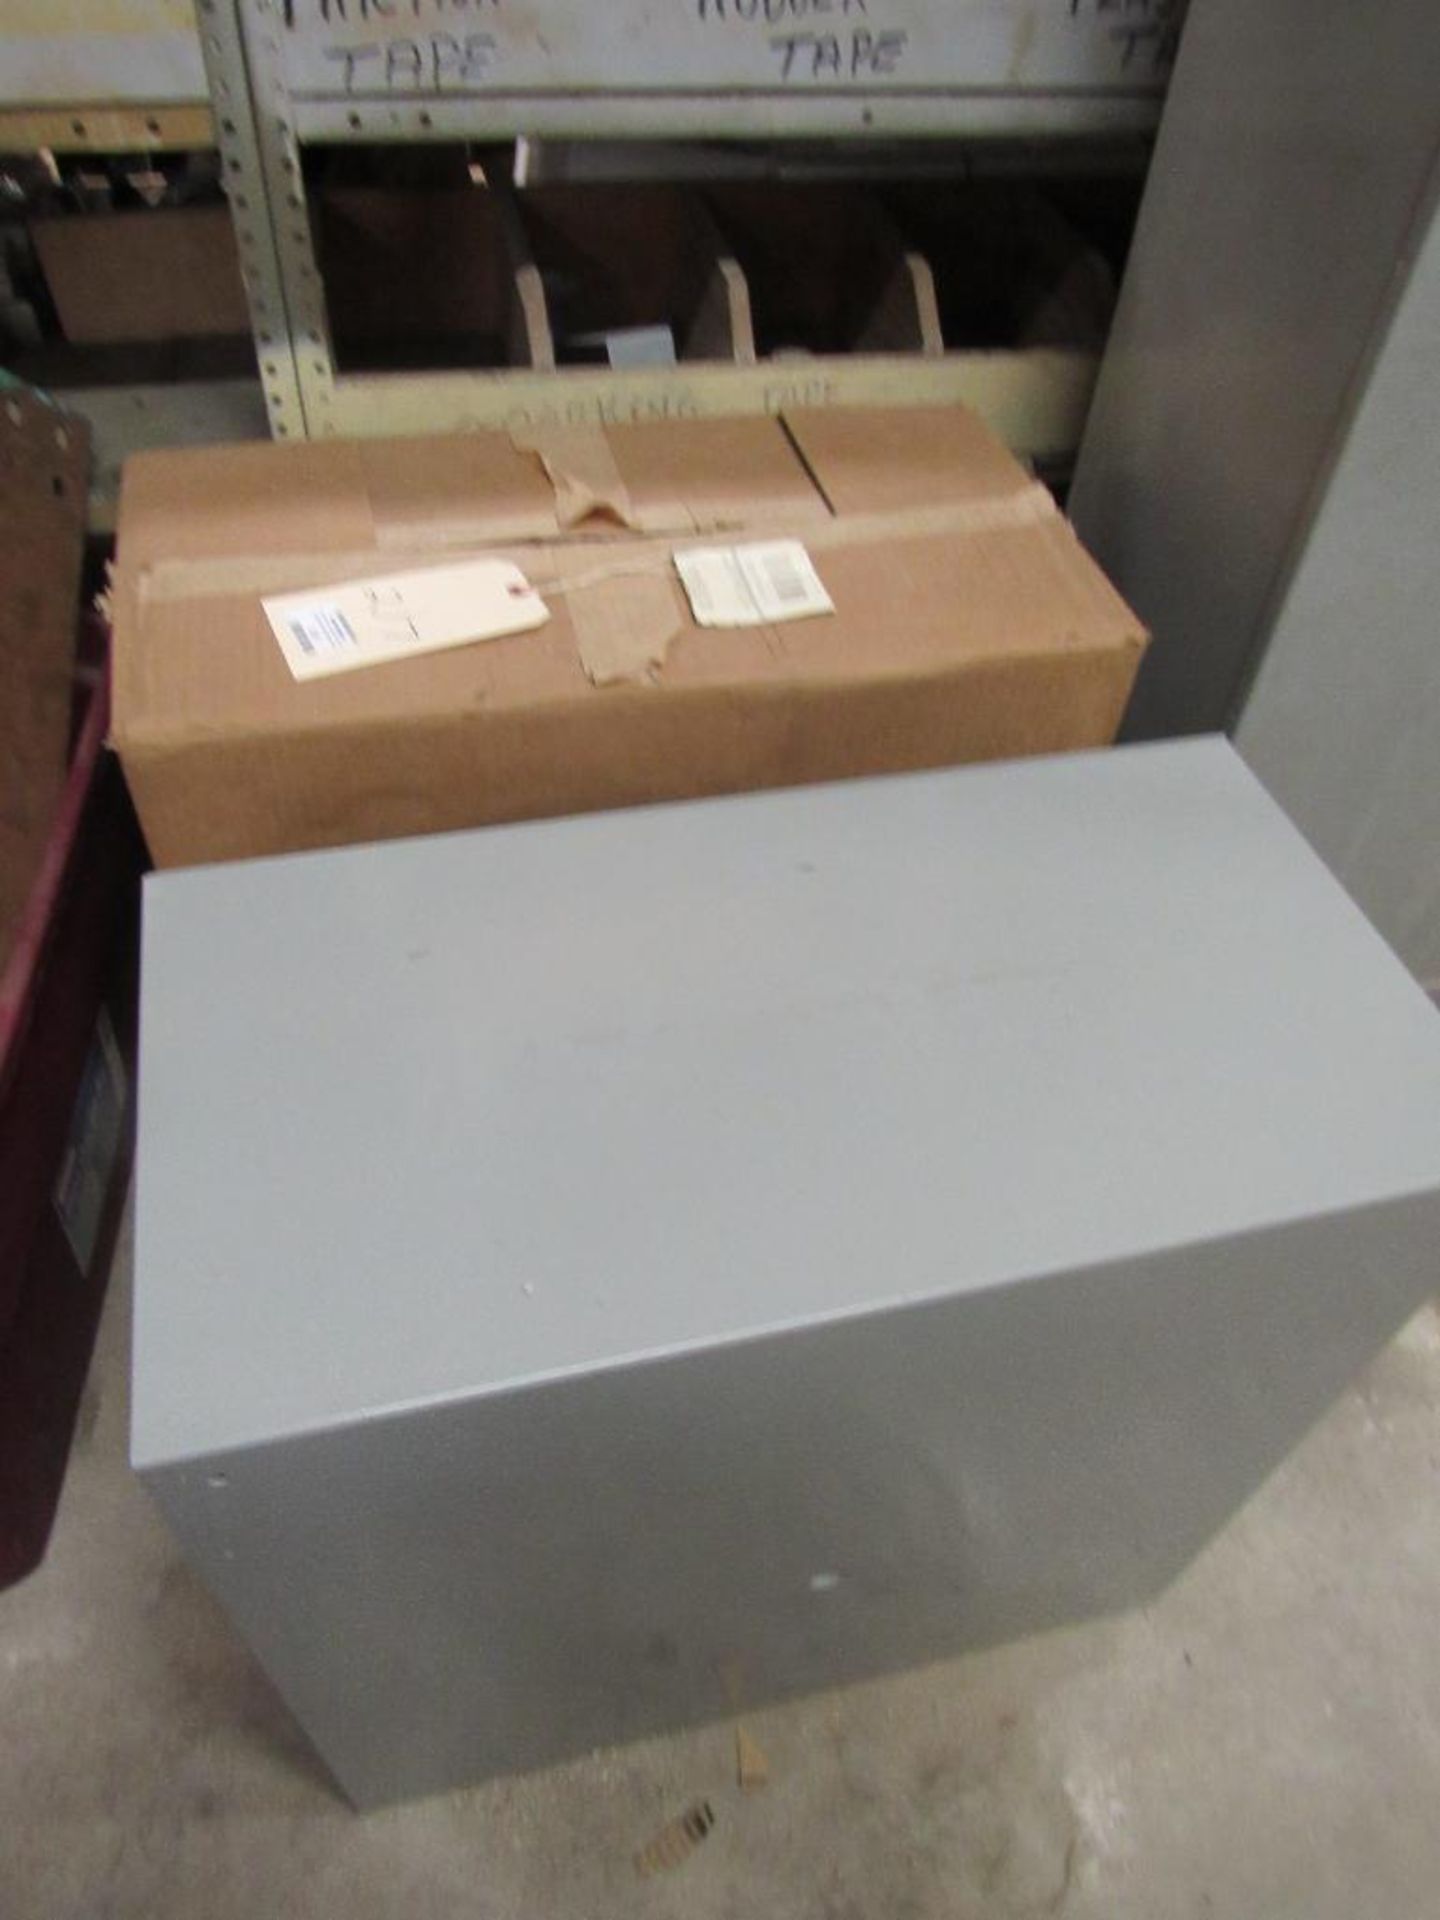 Lot of 2: J-Boxes, 24" x 24" x 12" deep - new in box - Image 2 of 4